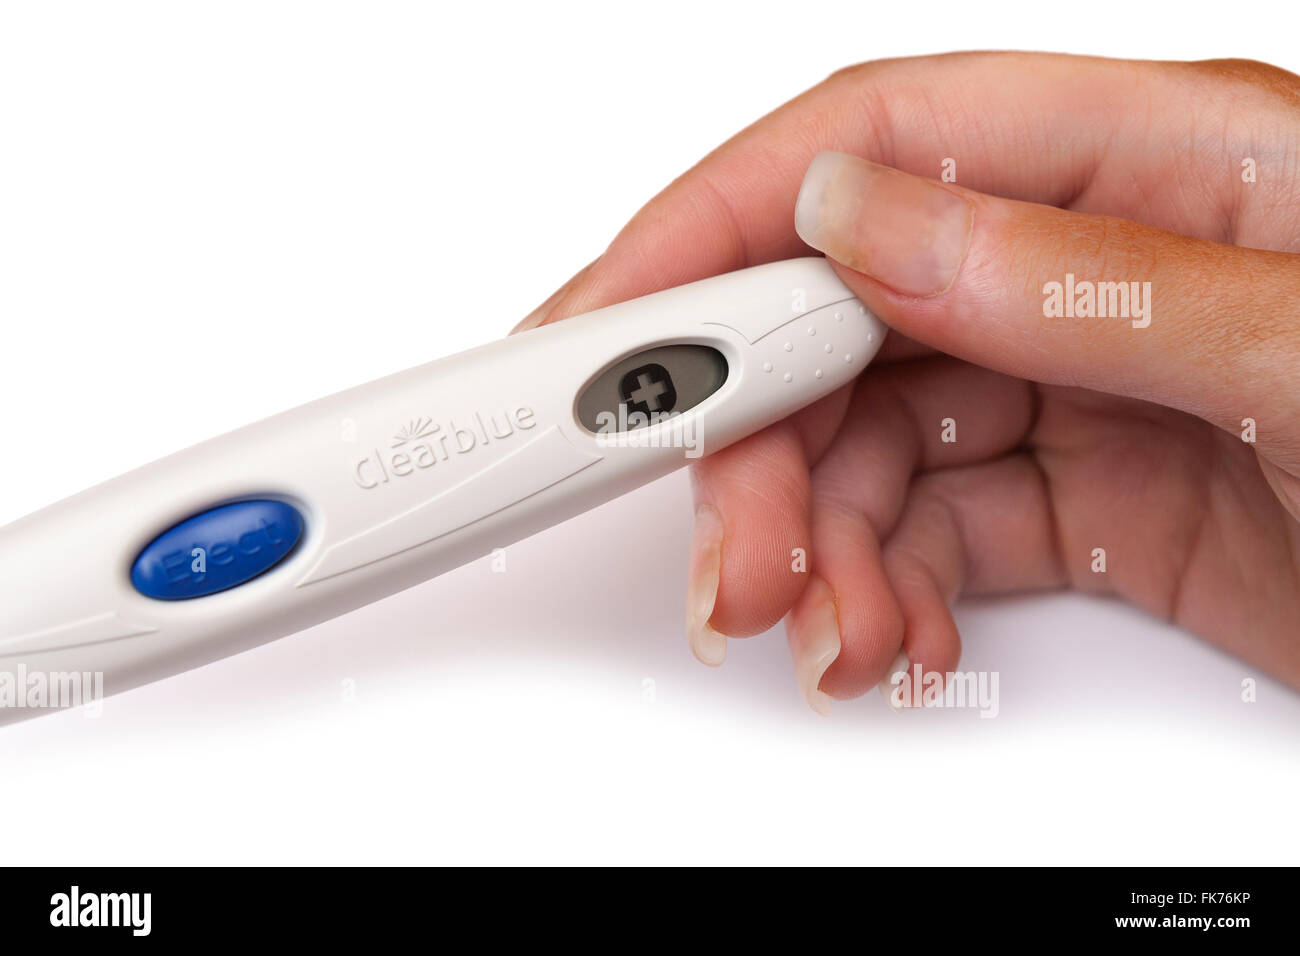 MÖLNDAL, SWEDEN - FEBRUARY 28 2007: Woman holding a positive Clearblue home  pregnancy test in her hands isolated on white background Stock Photo - Alamy